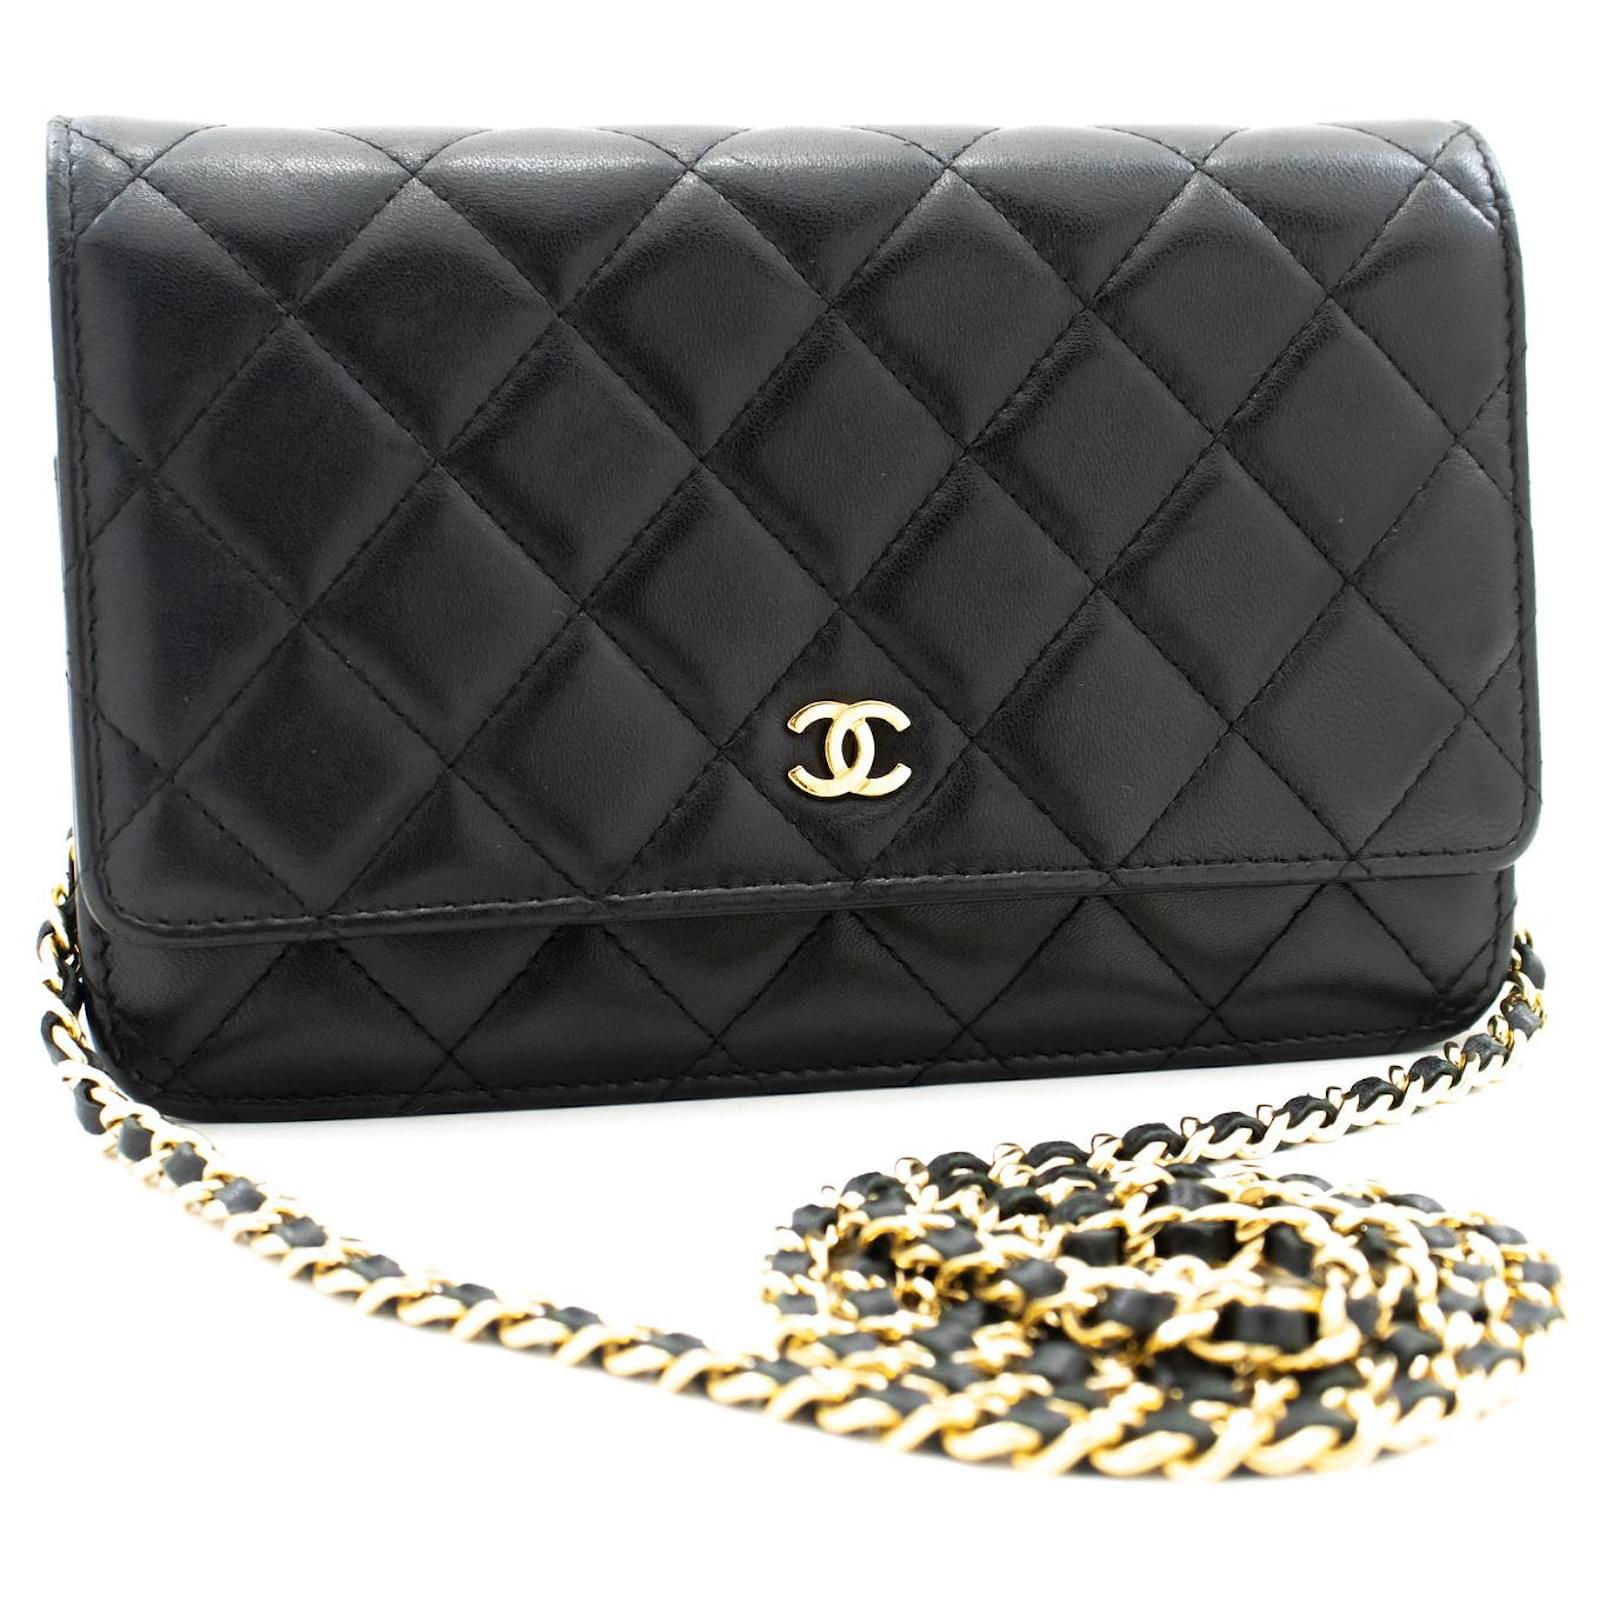 CHANEL QUILTED CAVIAR Wallet On Chain WOC Black Crossbody Bag **Worn 2X**  $2,795.00 - PicClick